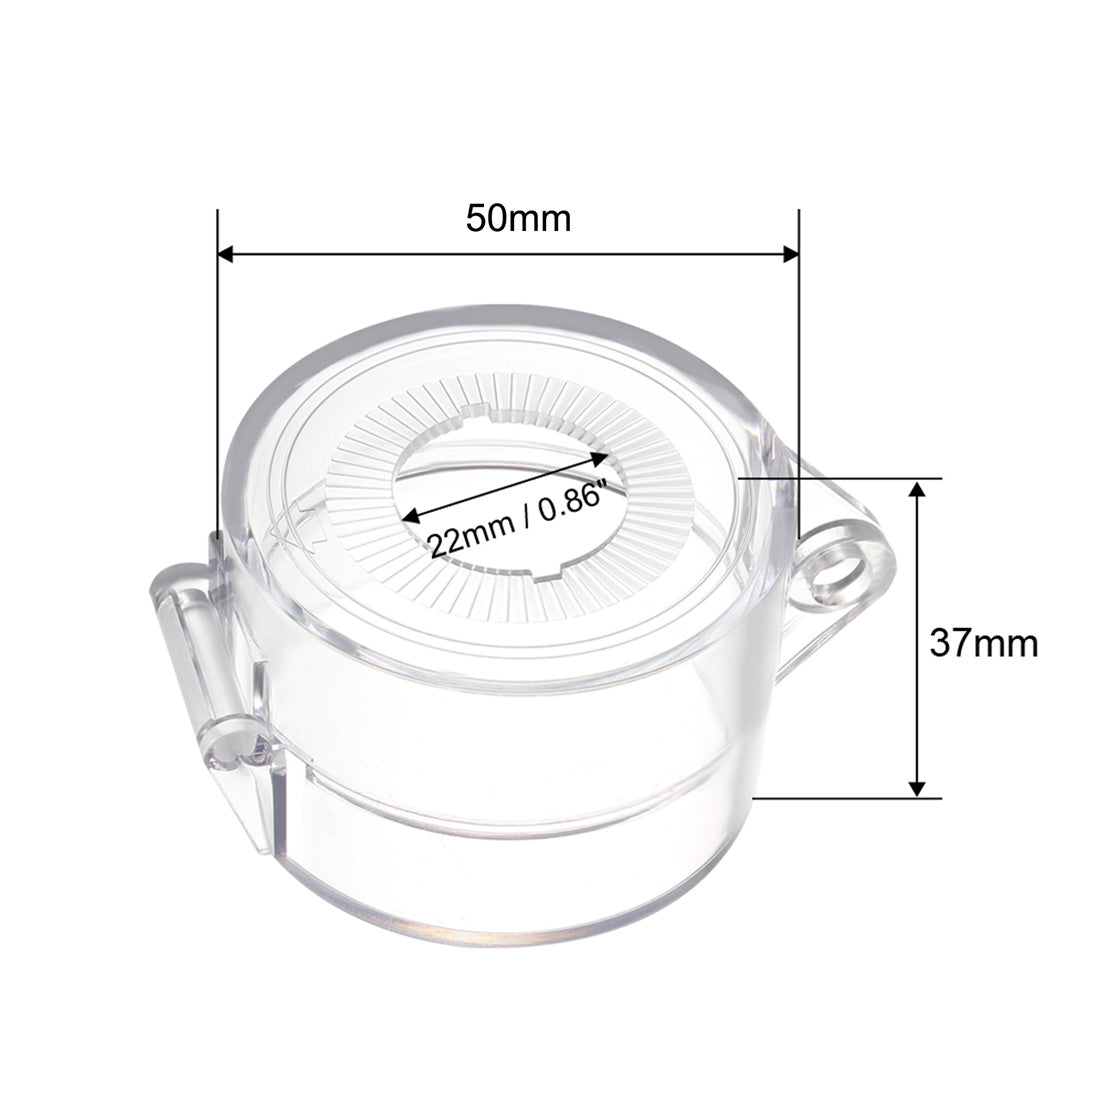 Uxcell Uxcell 1pcs Clear Plastic Switch Cover Protector for 30mm Diameter Push Button Switch 55*37